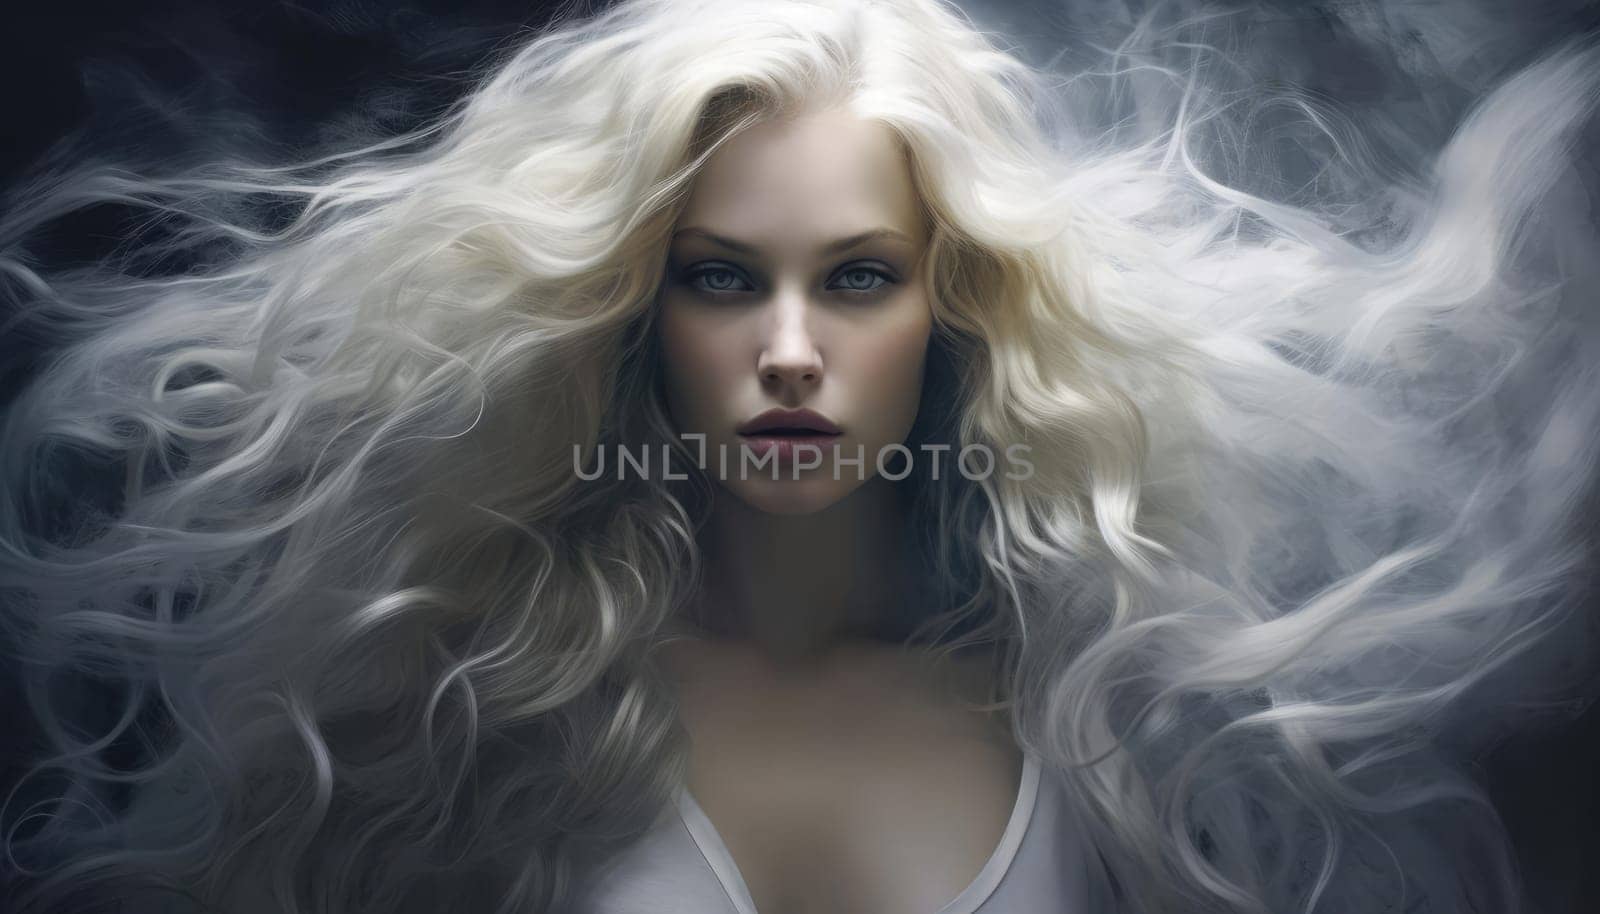 Portrait of a young beautiful woman with very long blonde hair